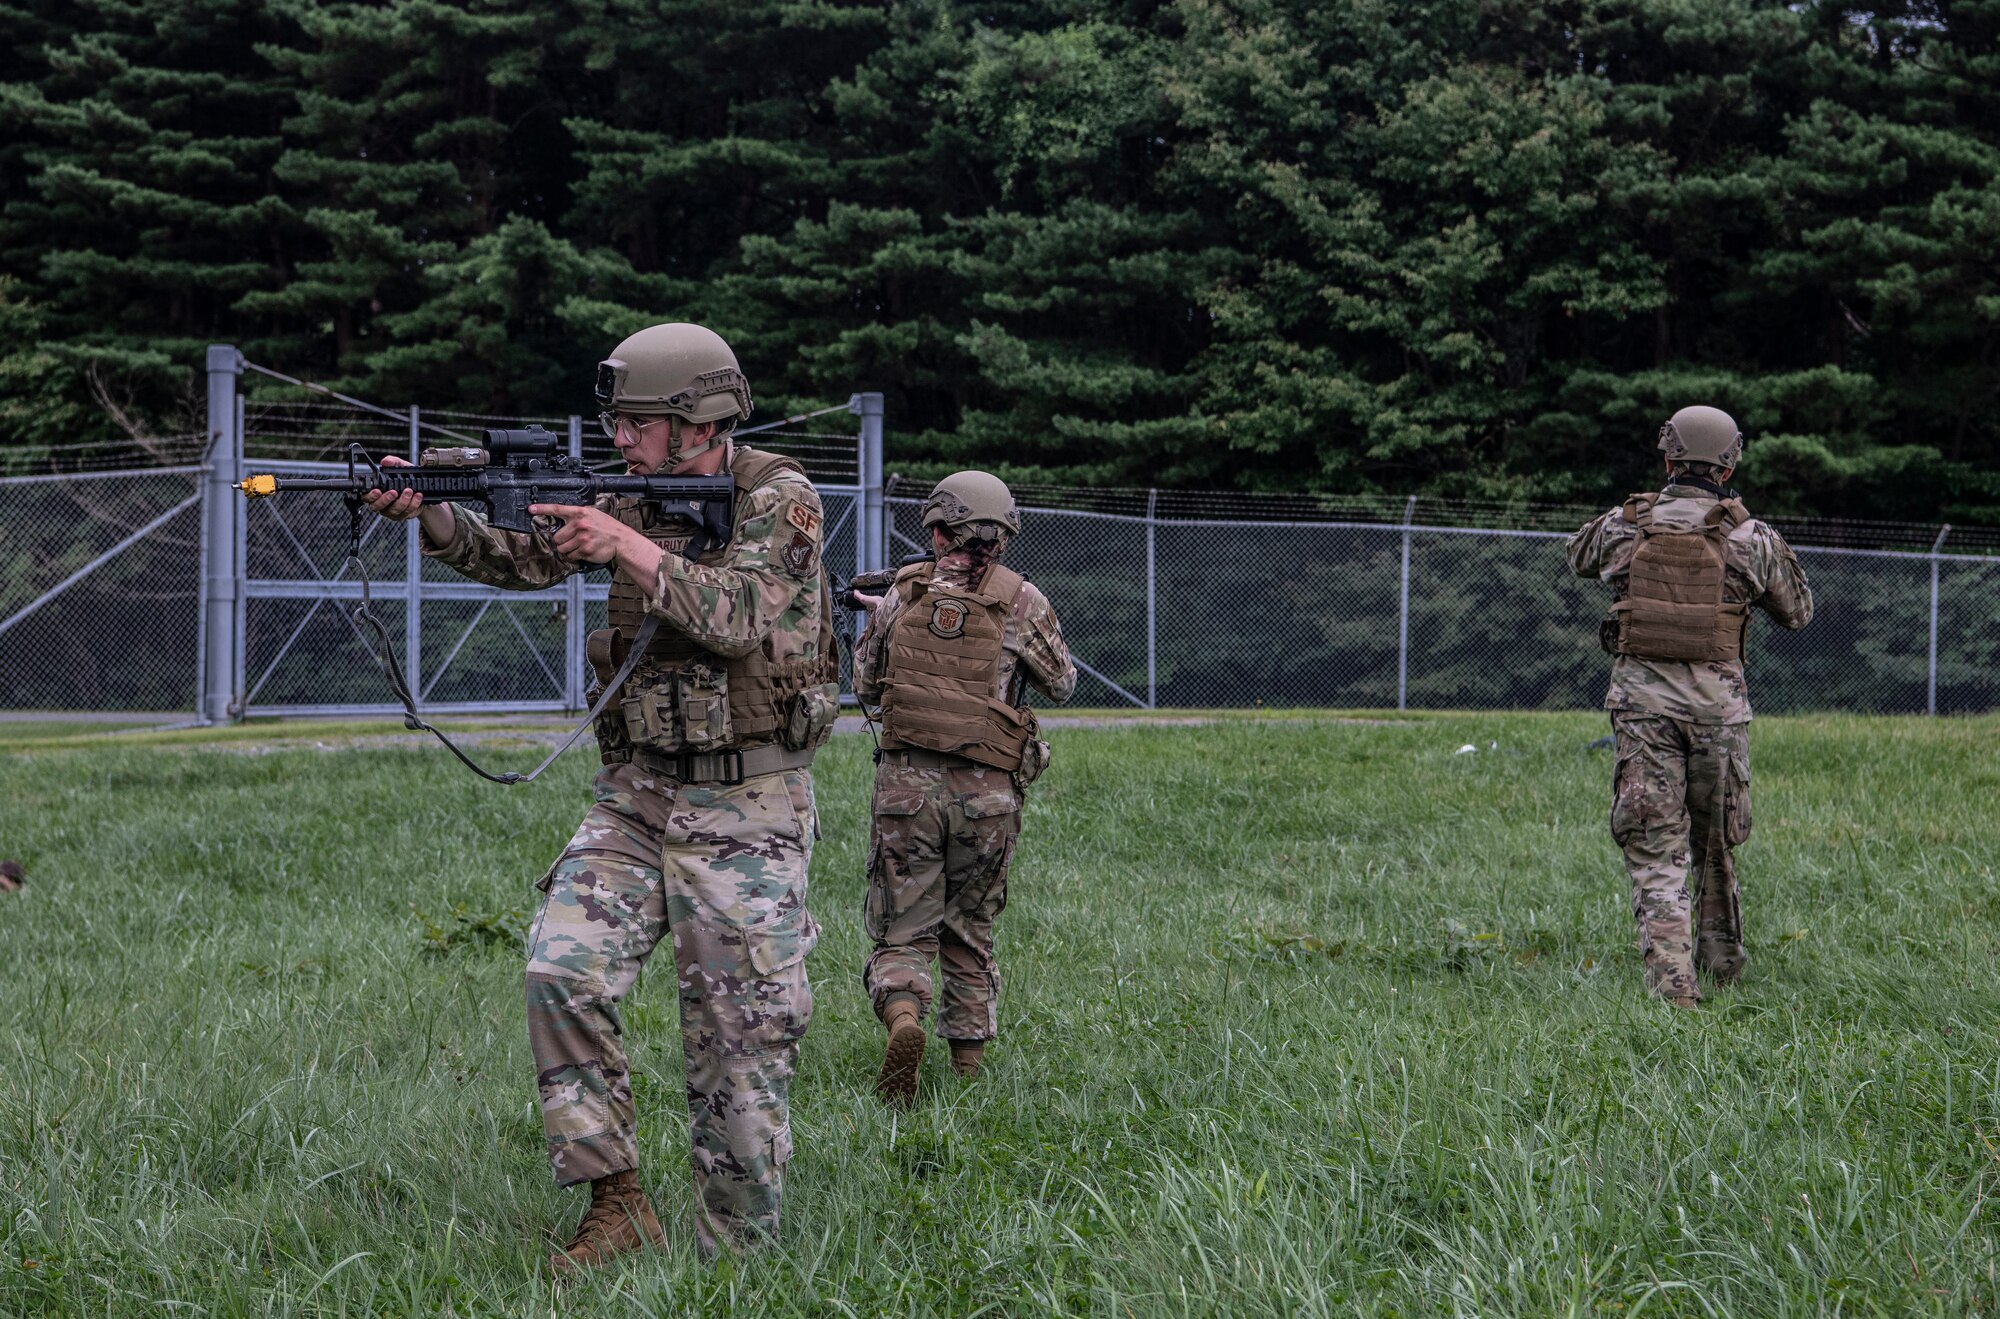 U.S. Air Force members holding rifles respond to a simulated perimeter breach.